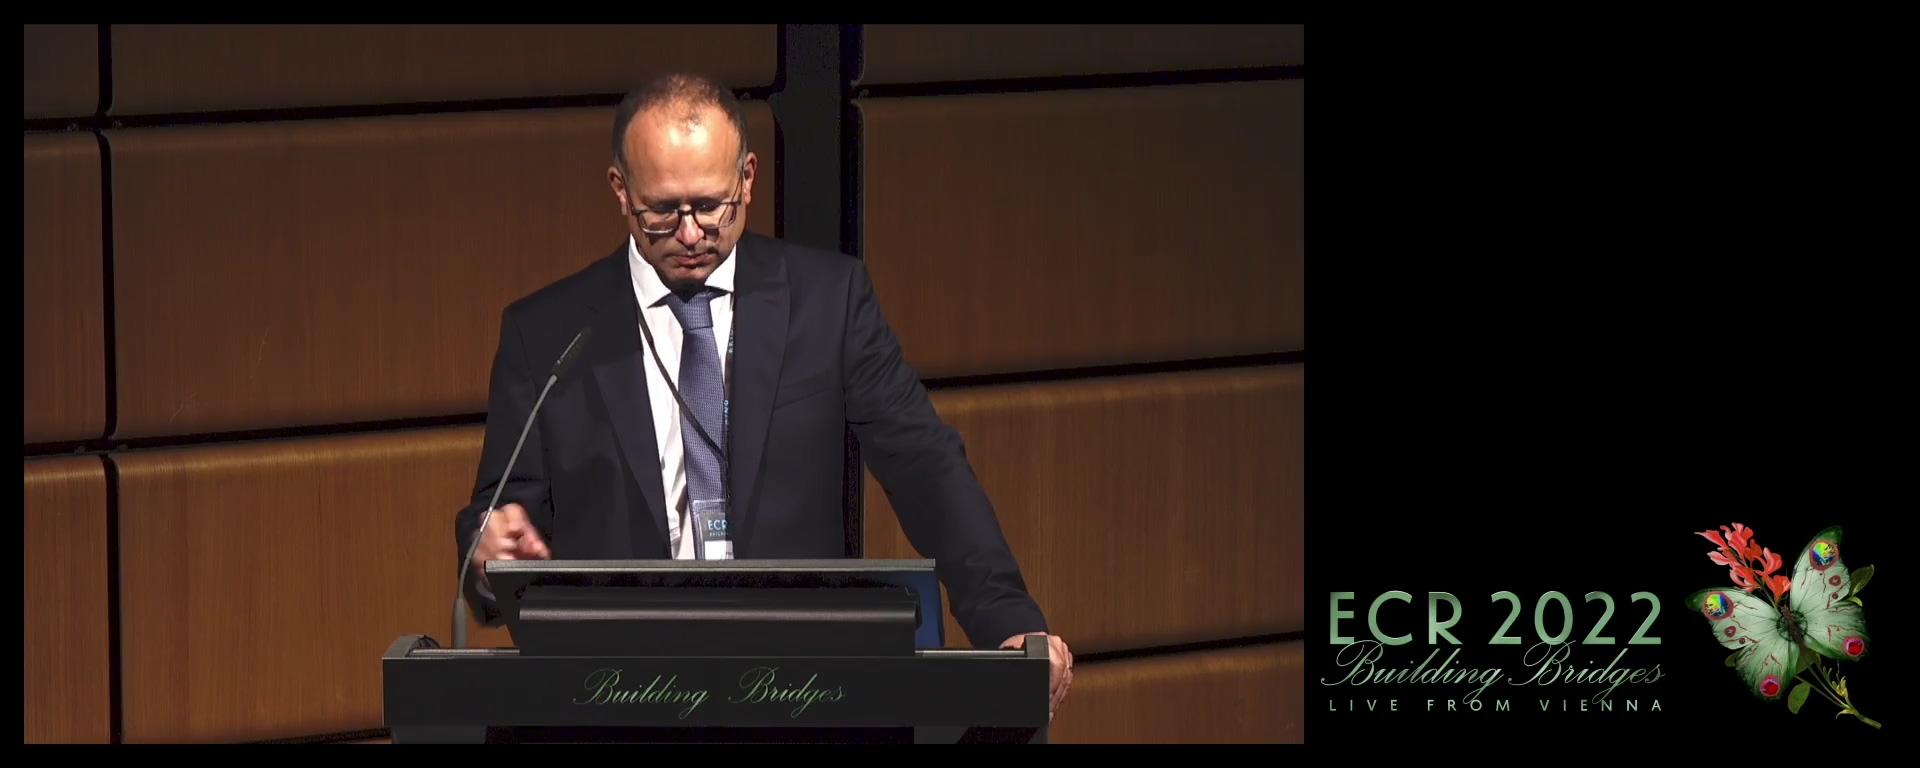 Diagnosis, staging, and restaging of lung cancer after immunotherapy - Helmut Prosch, Vienna / AT